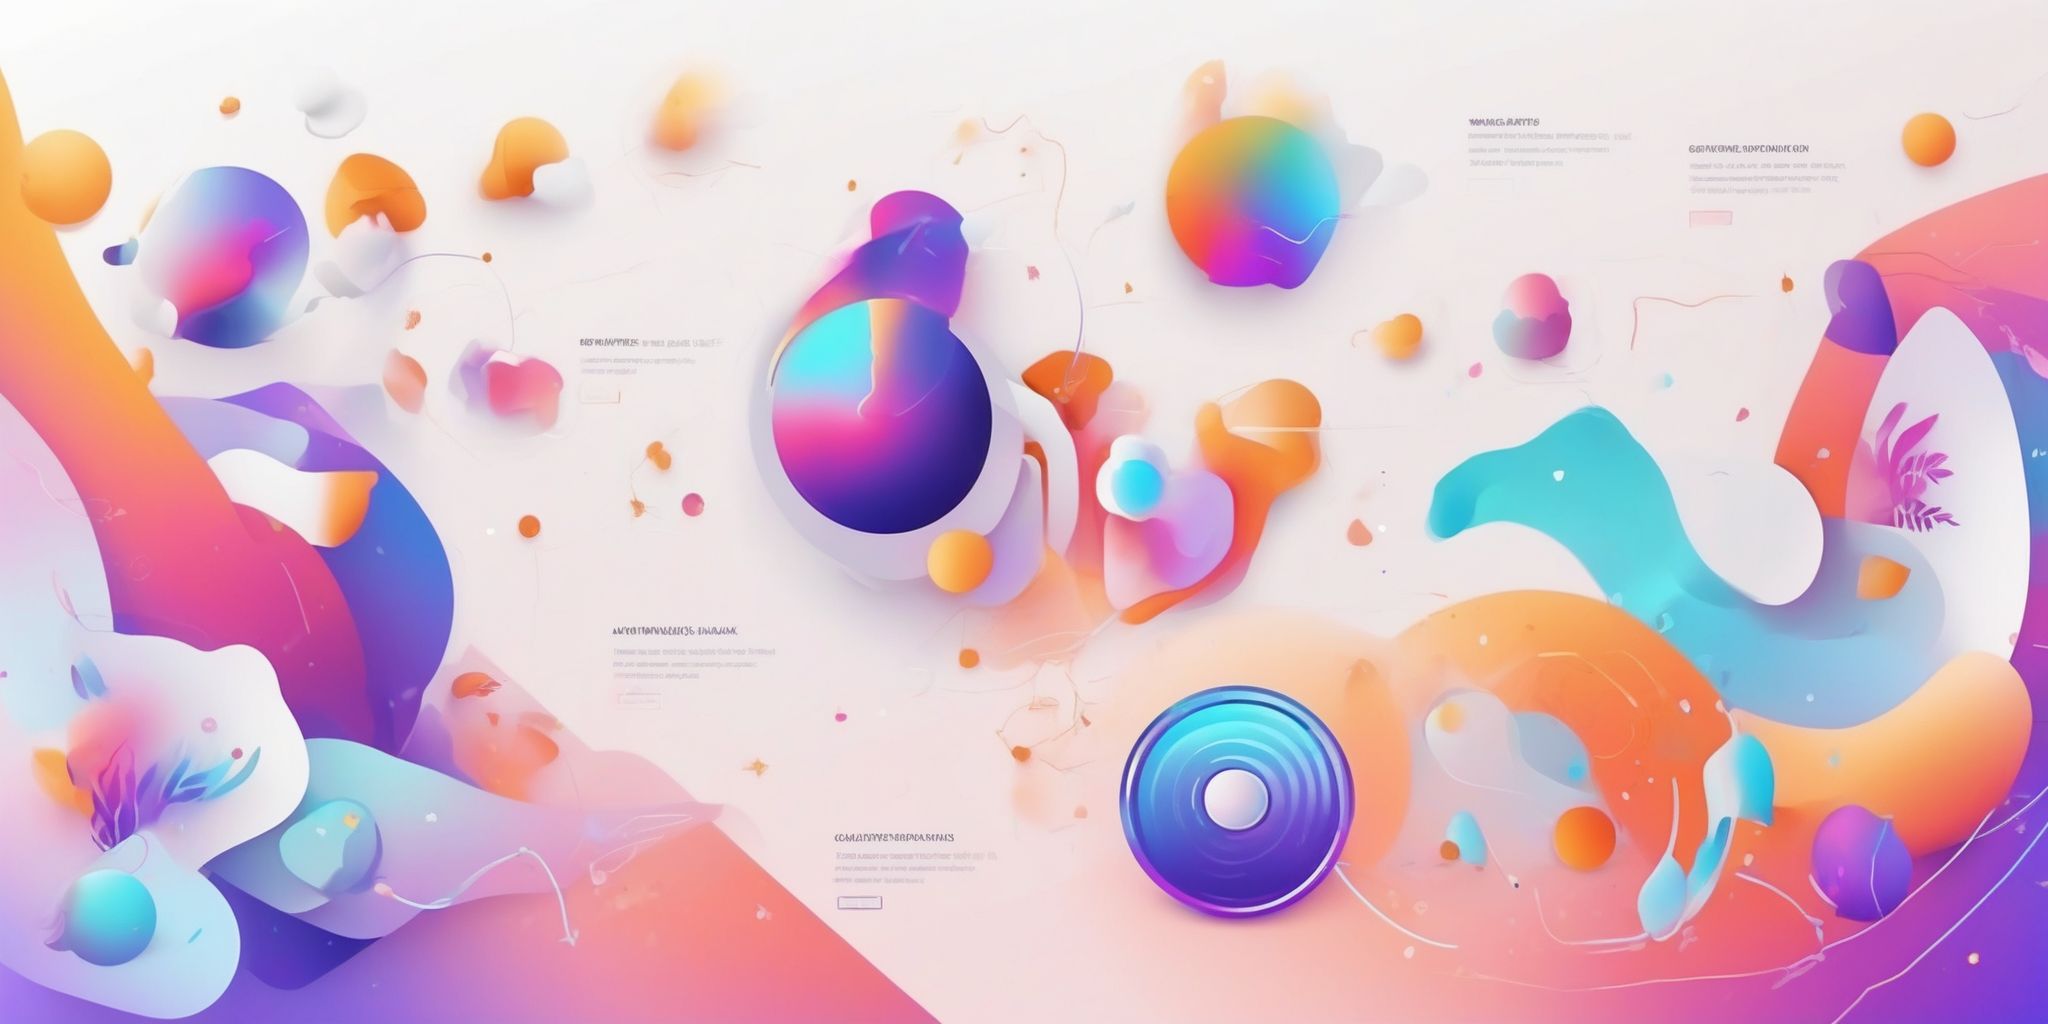 Digital promotion in illustration style with gradients and white background